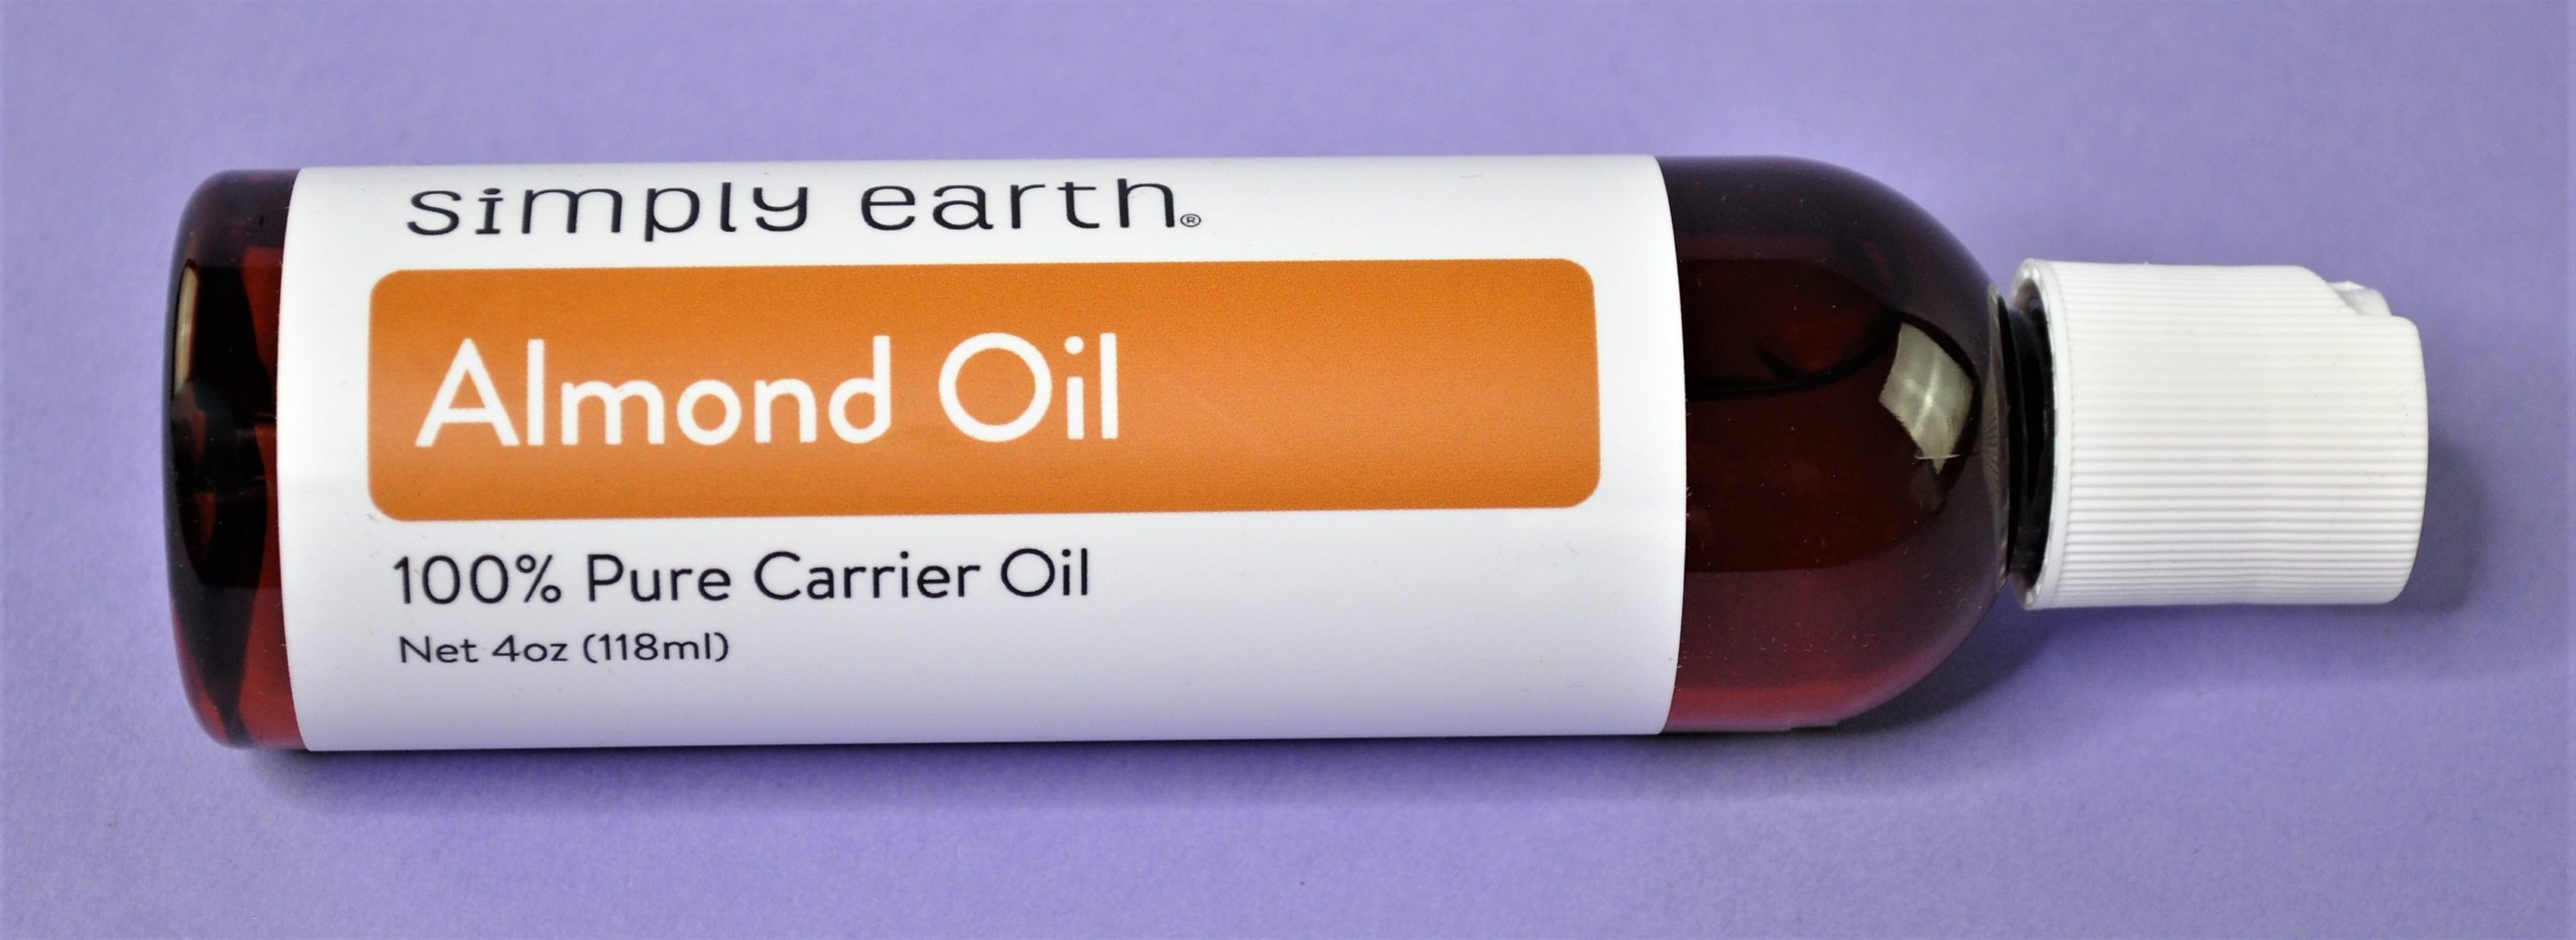 Simply Earth Almond Oil